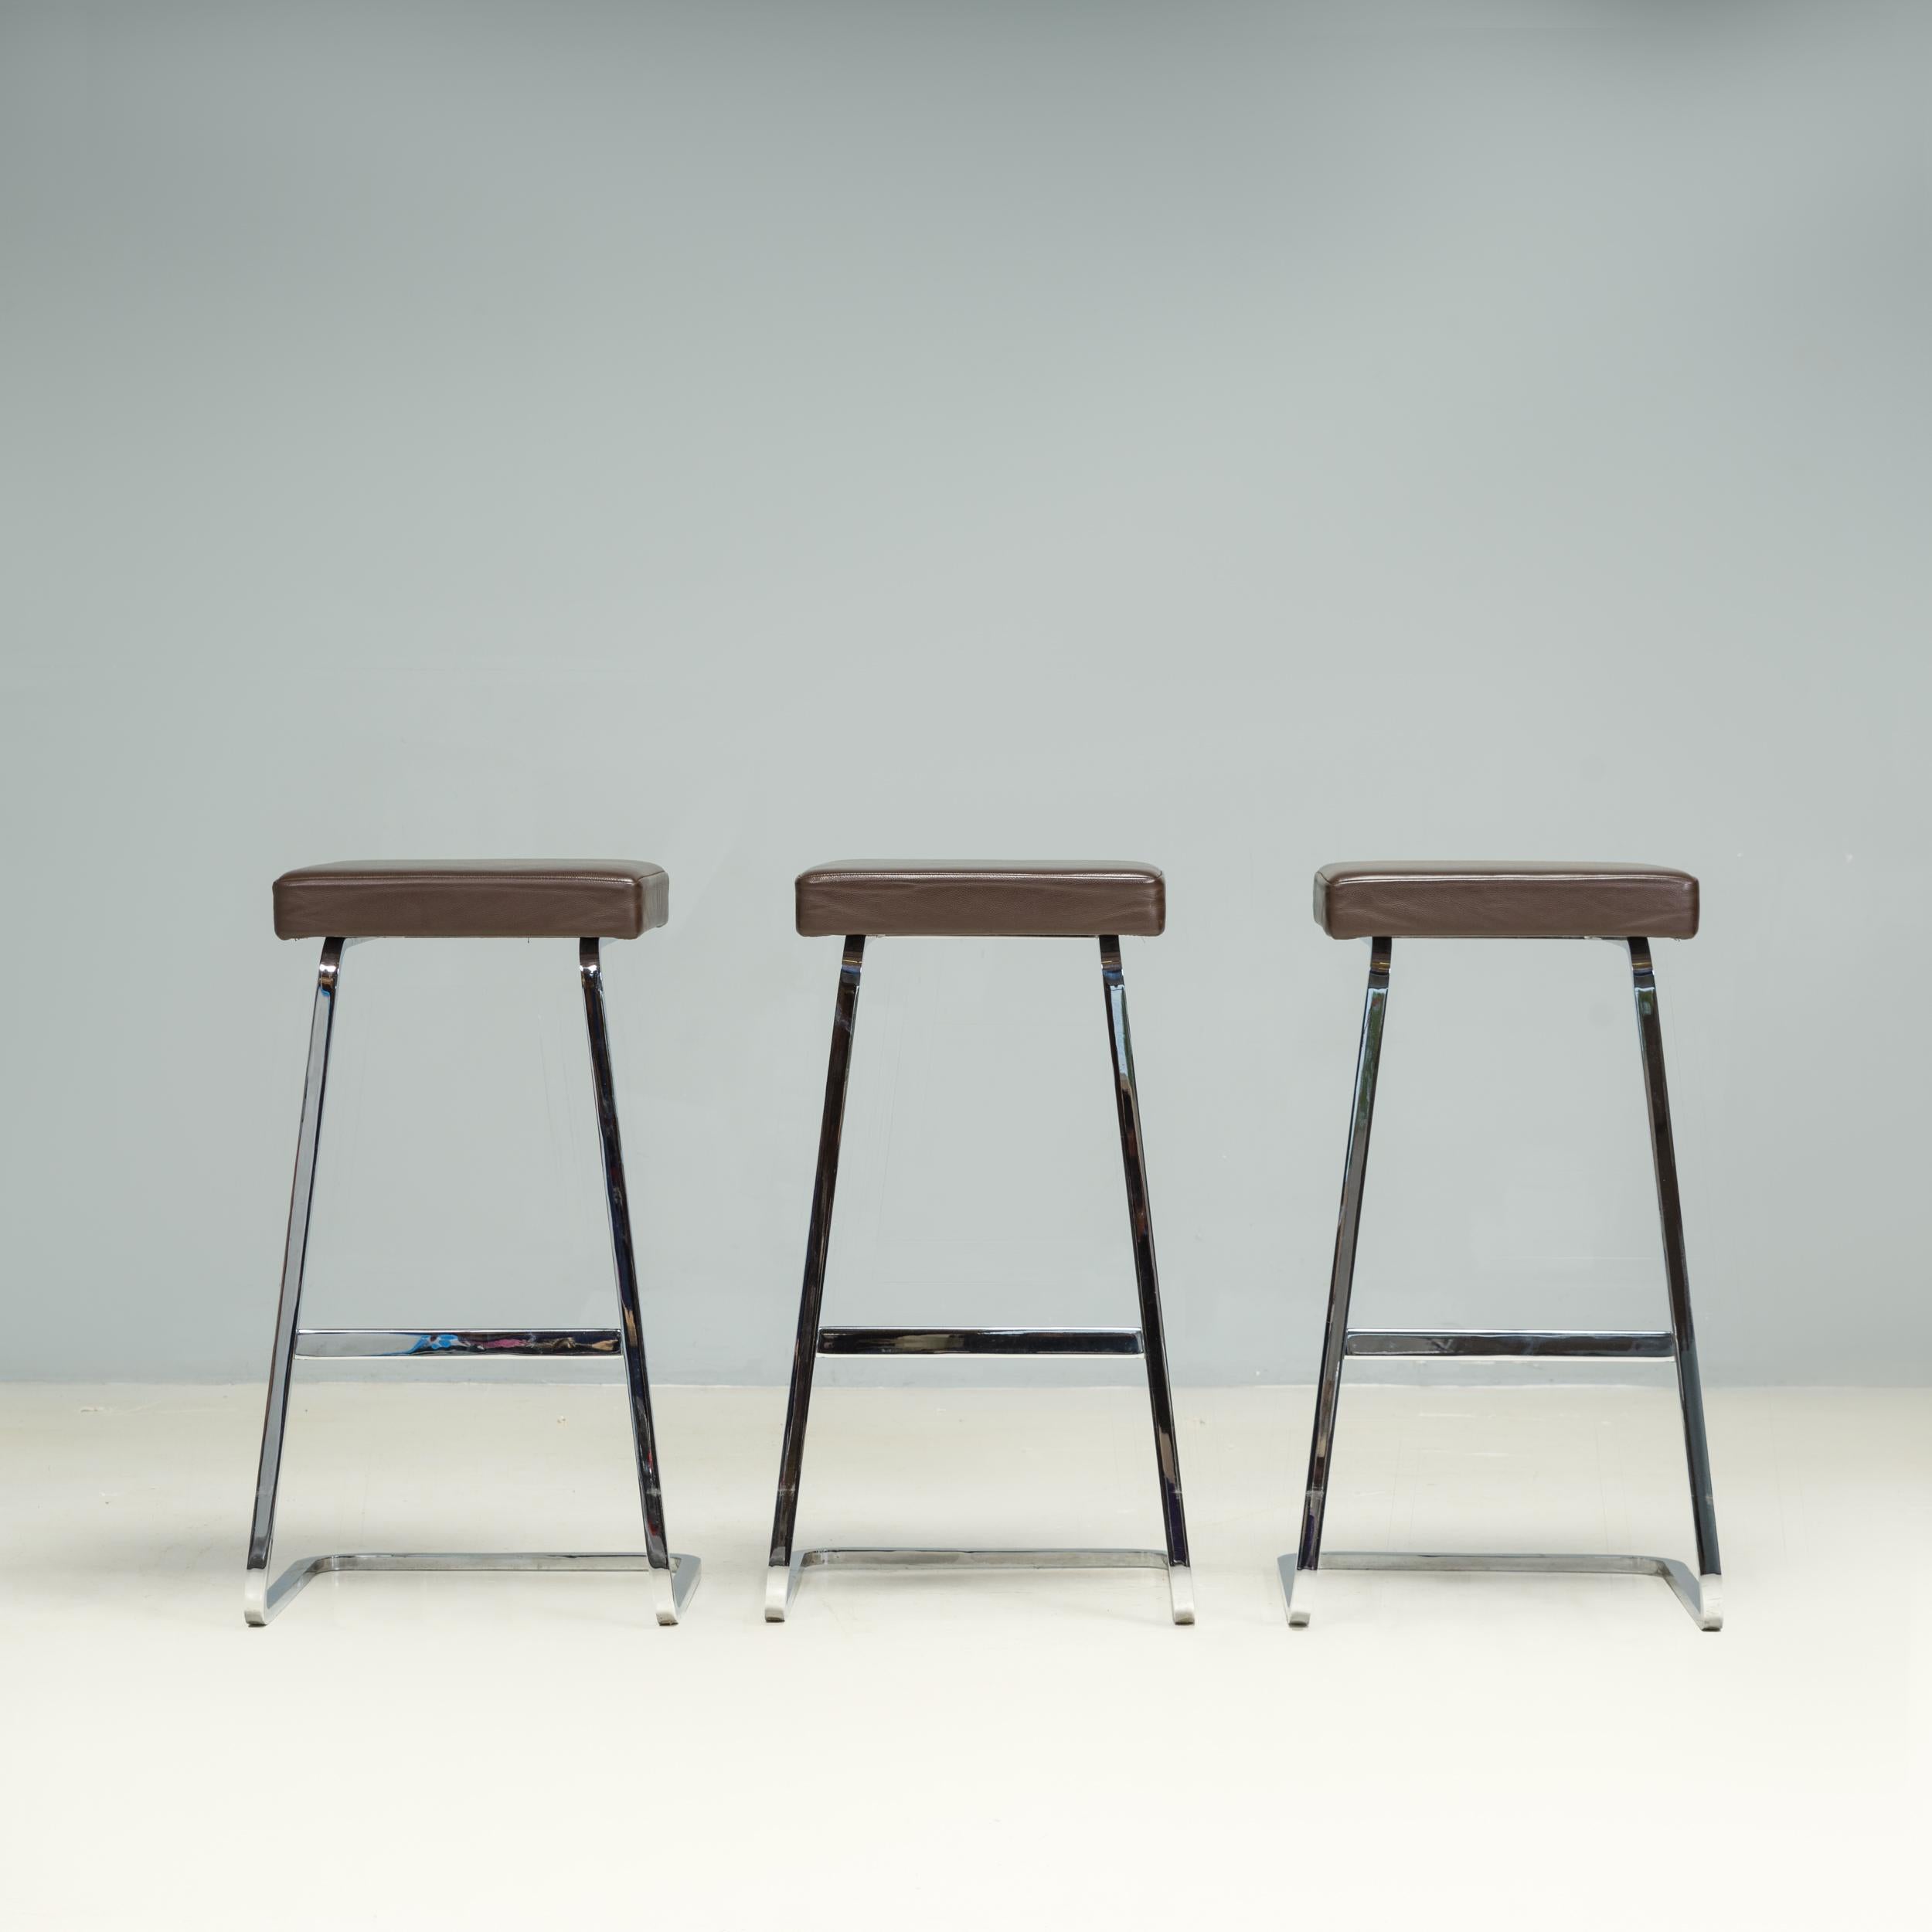 Italian Ludwig Mies van der Rohe by Knoll Brown Leather Four Seasons Stools, Set of 3